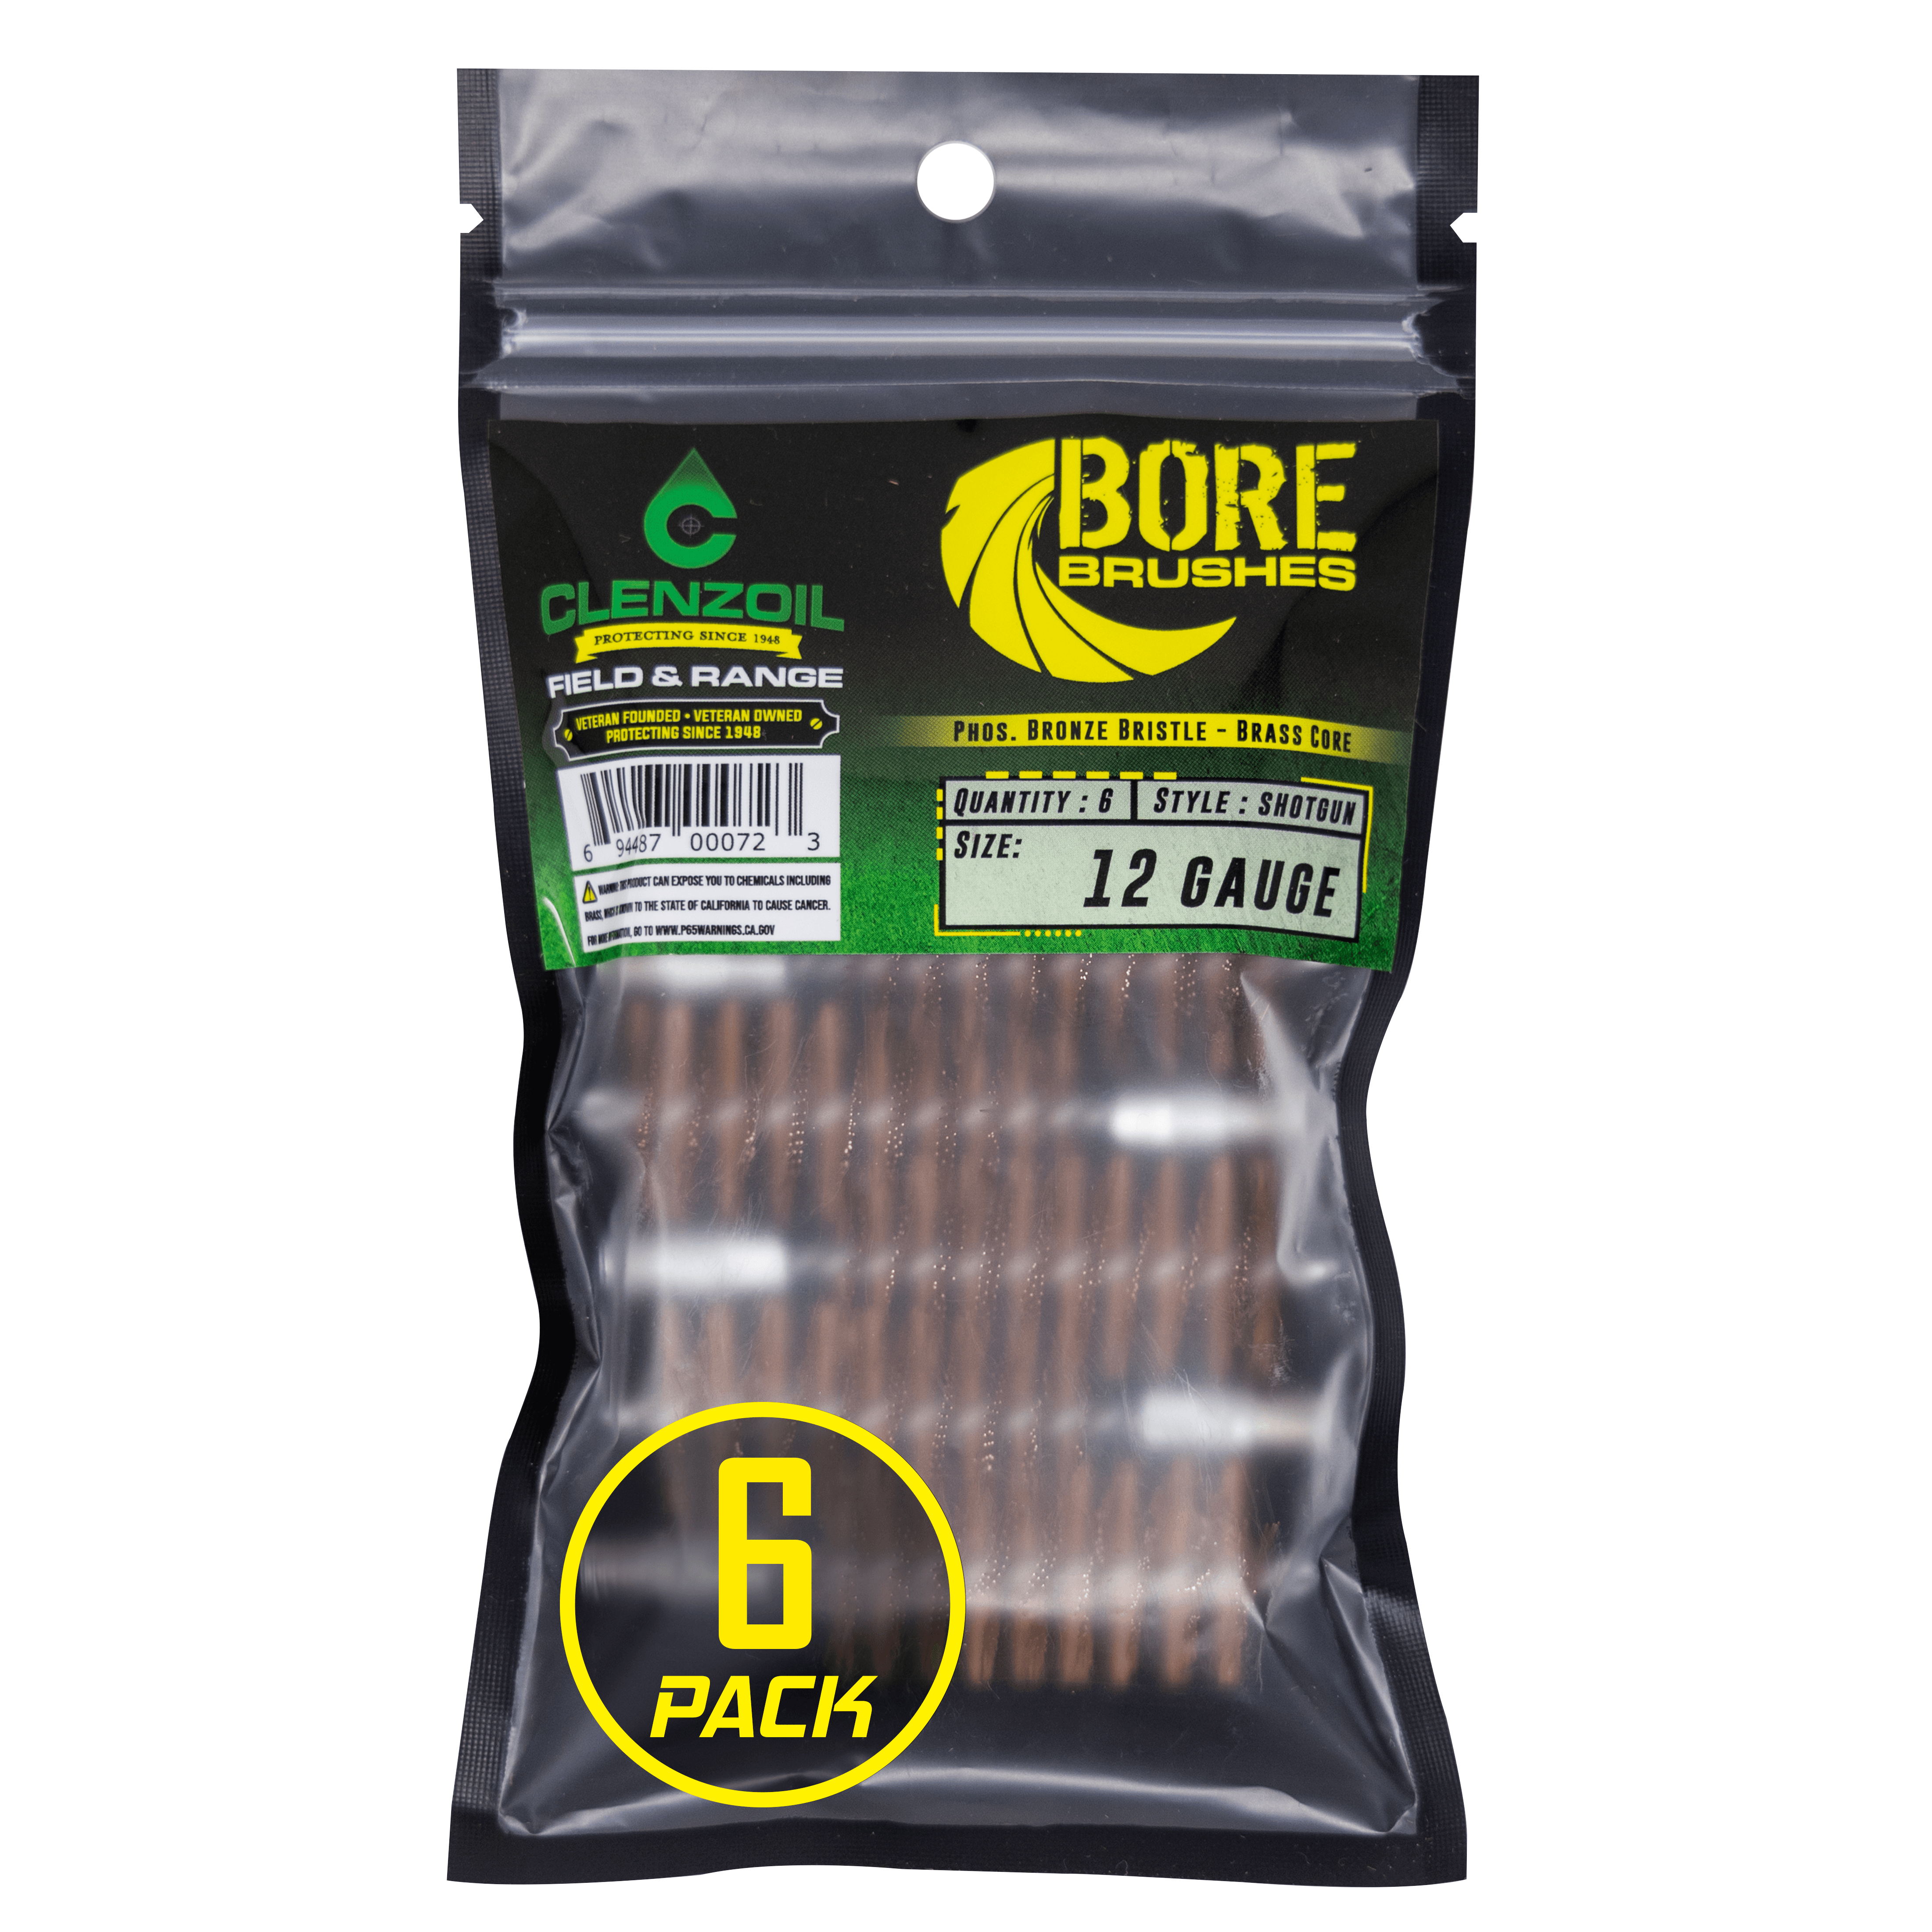 Bronze Bore Brushes - Clenzoil Unlimited